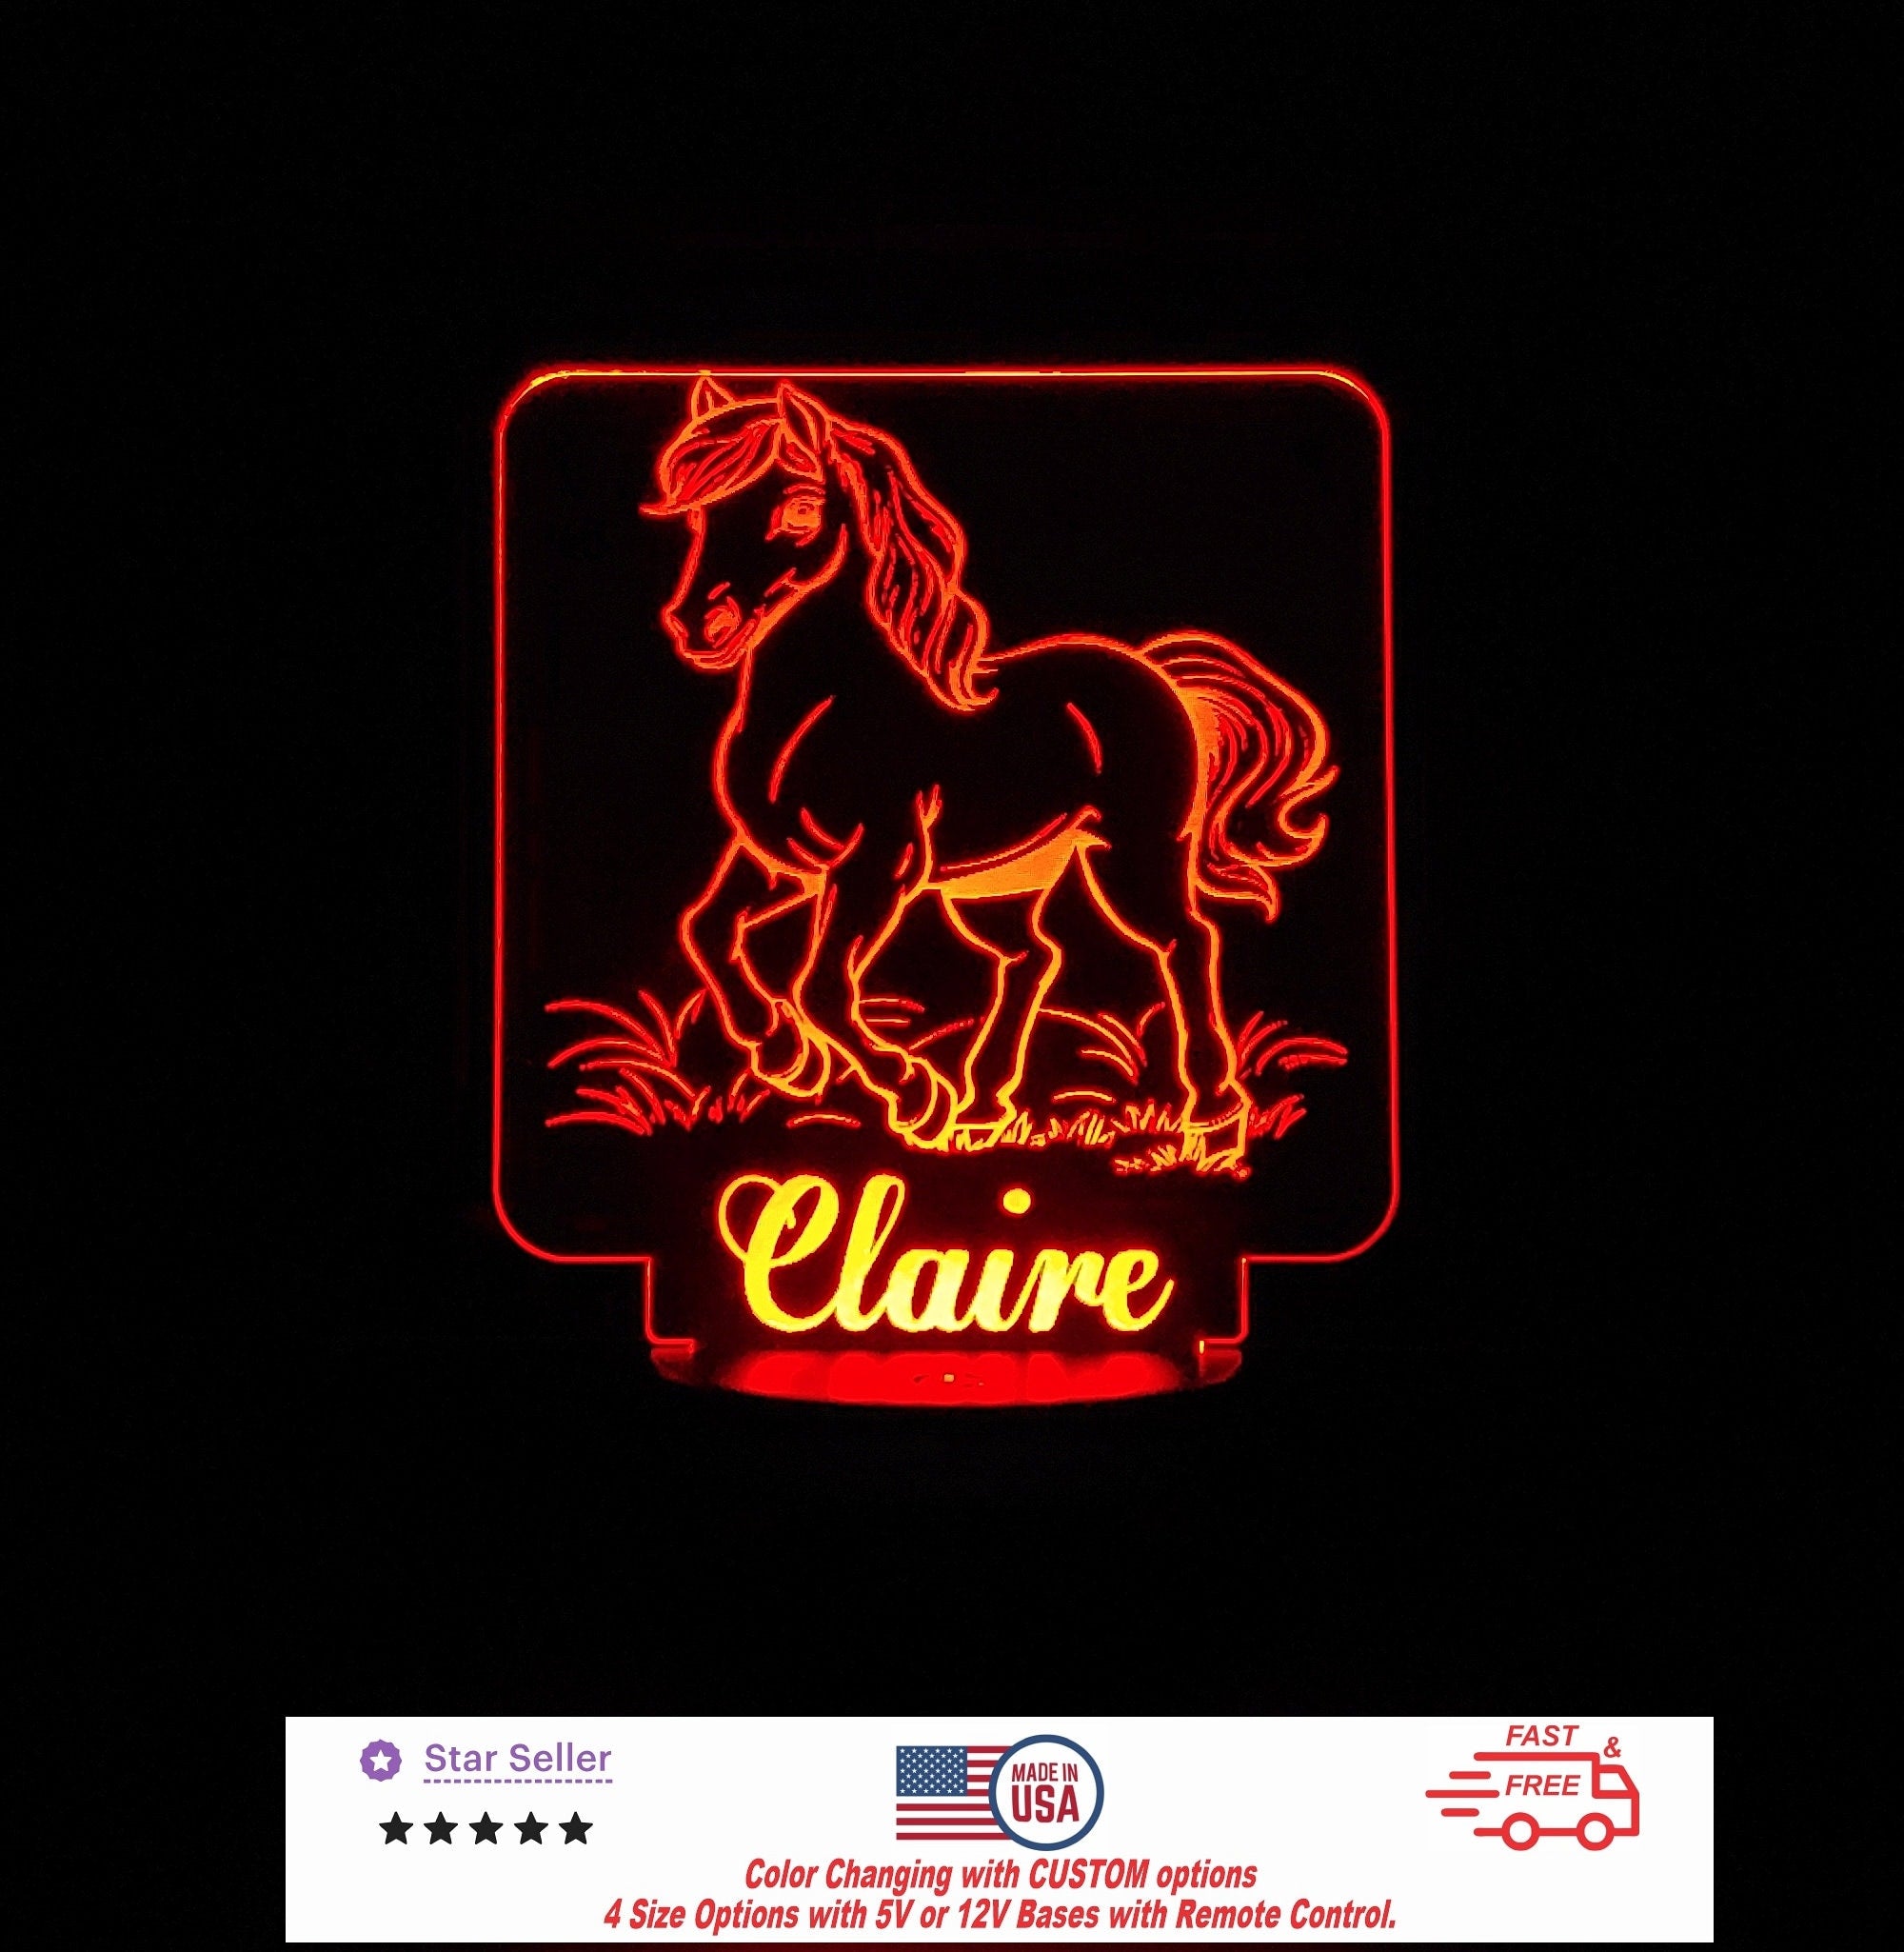 Custom Baby Horse Personalized LED Night Light - Neon sign, Room Decor, Party Enhancer, Nursery, Kids' Room, Free Shipping Made in USA